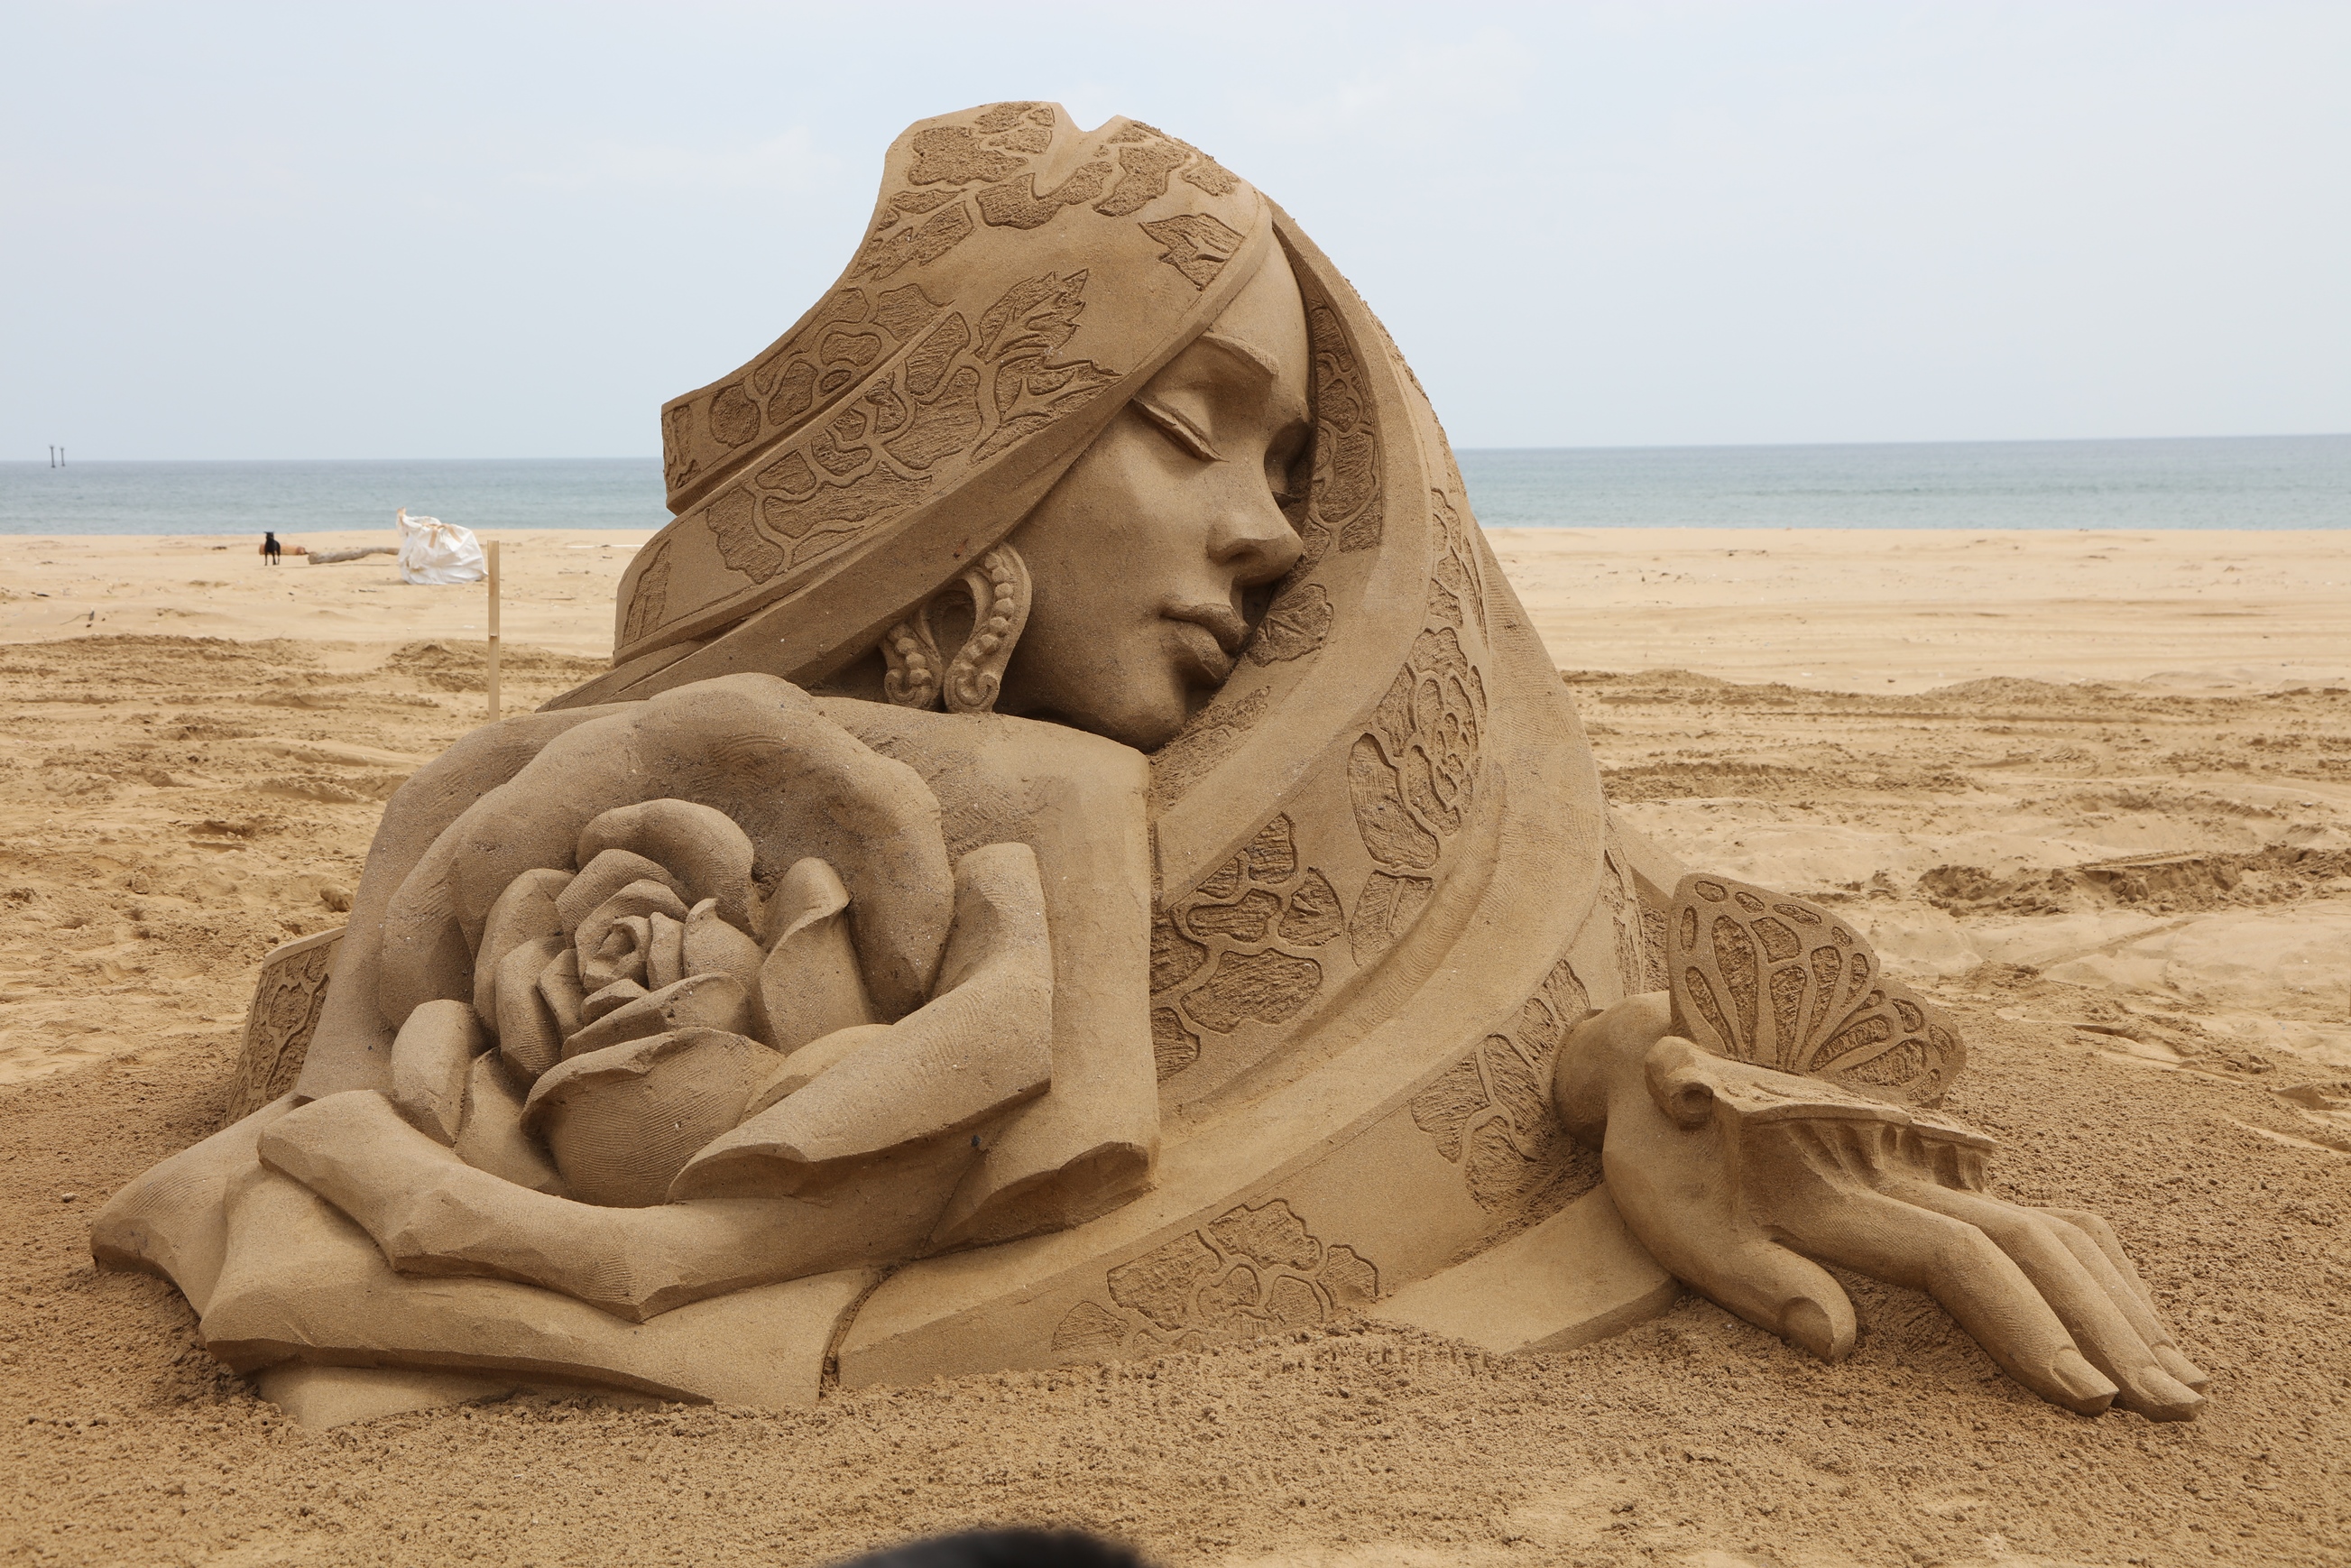 The third place and the Golden Shovel Award--Chinese sand sculpture master Wang Jie's "National Colors"